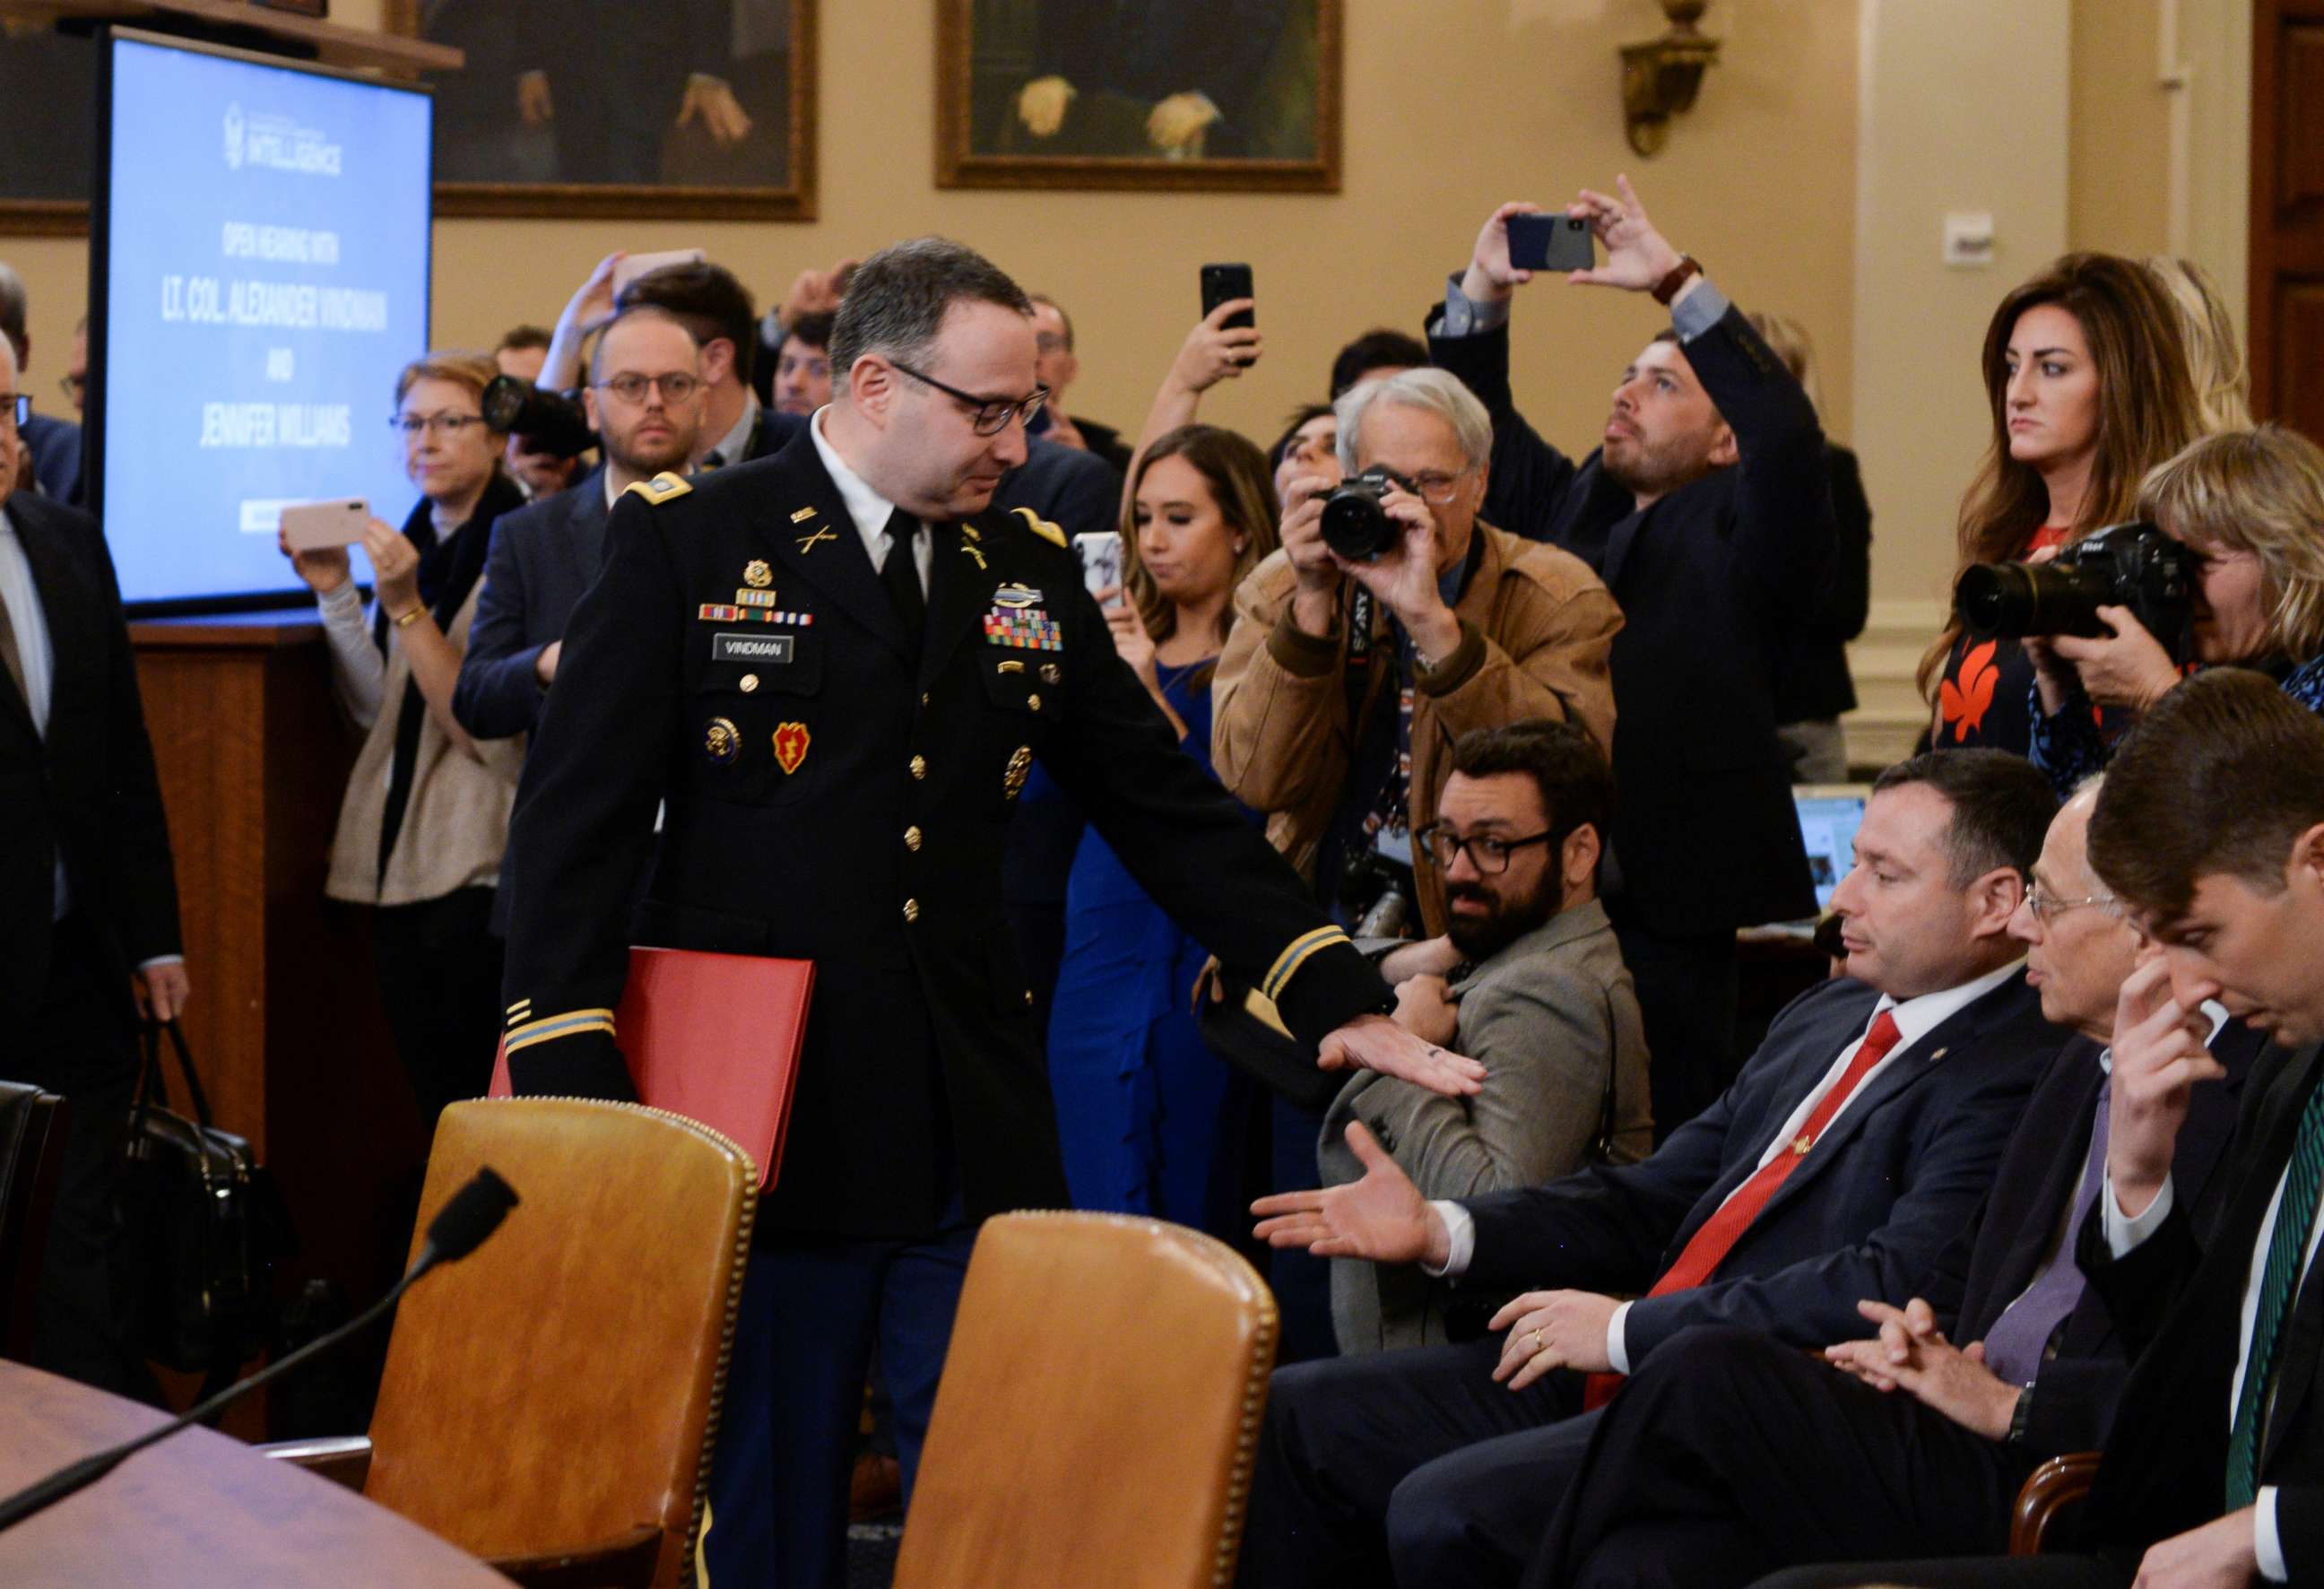 PHOTO: Lt. Colonel Alexander Vindman greets his twin brother Yevgeny Vindman sitting in the audience as Vindman arrives to give testimony as part of the impeachment inquiry into President Donald Trump on Capitol Hill in Washington, D.C., Nov. 19, 2019.